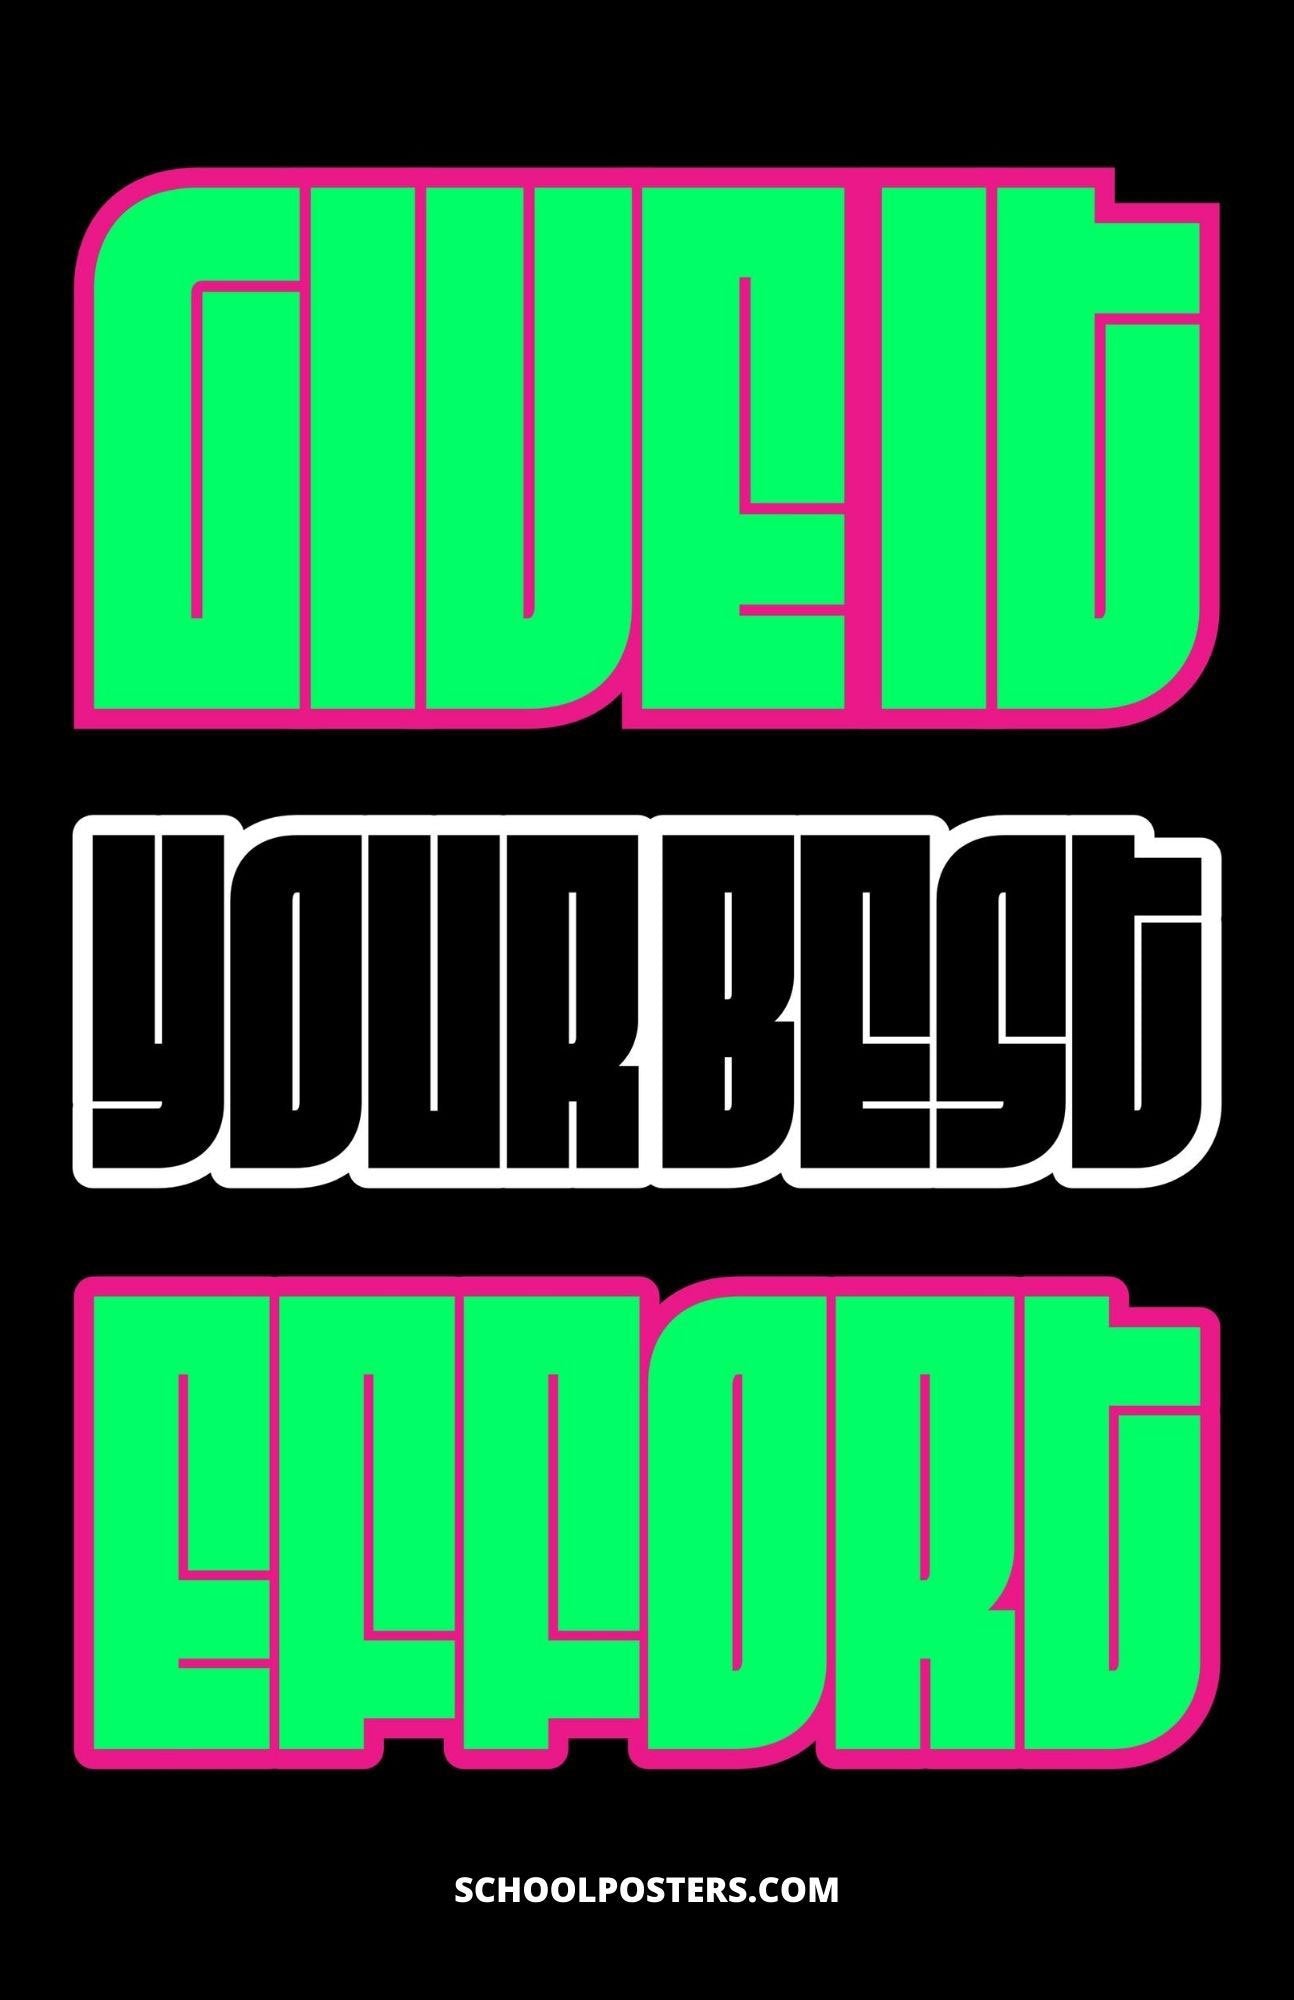 Give It Your Best Effort Poster